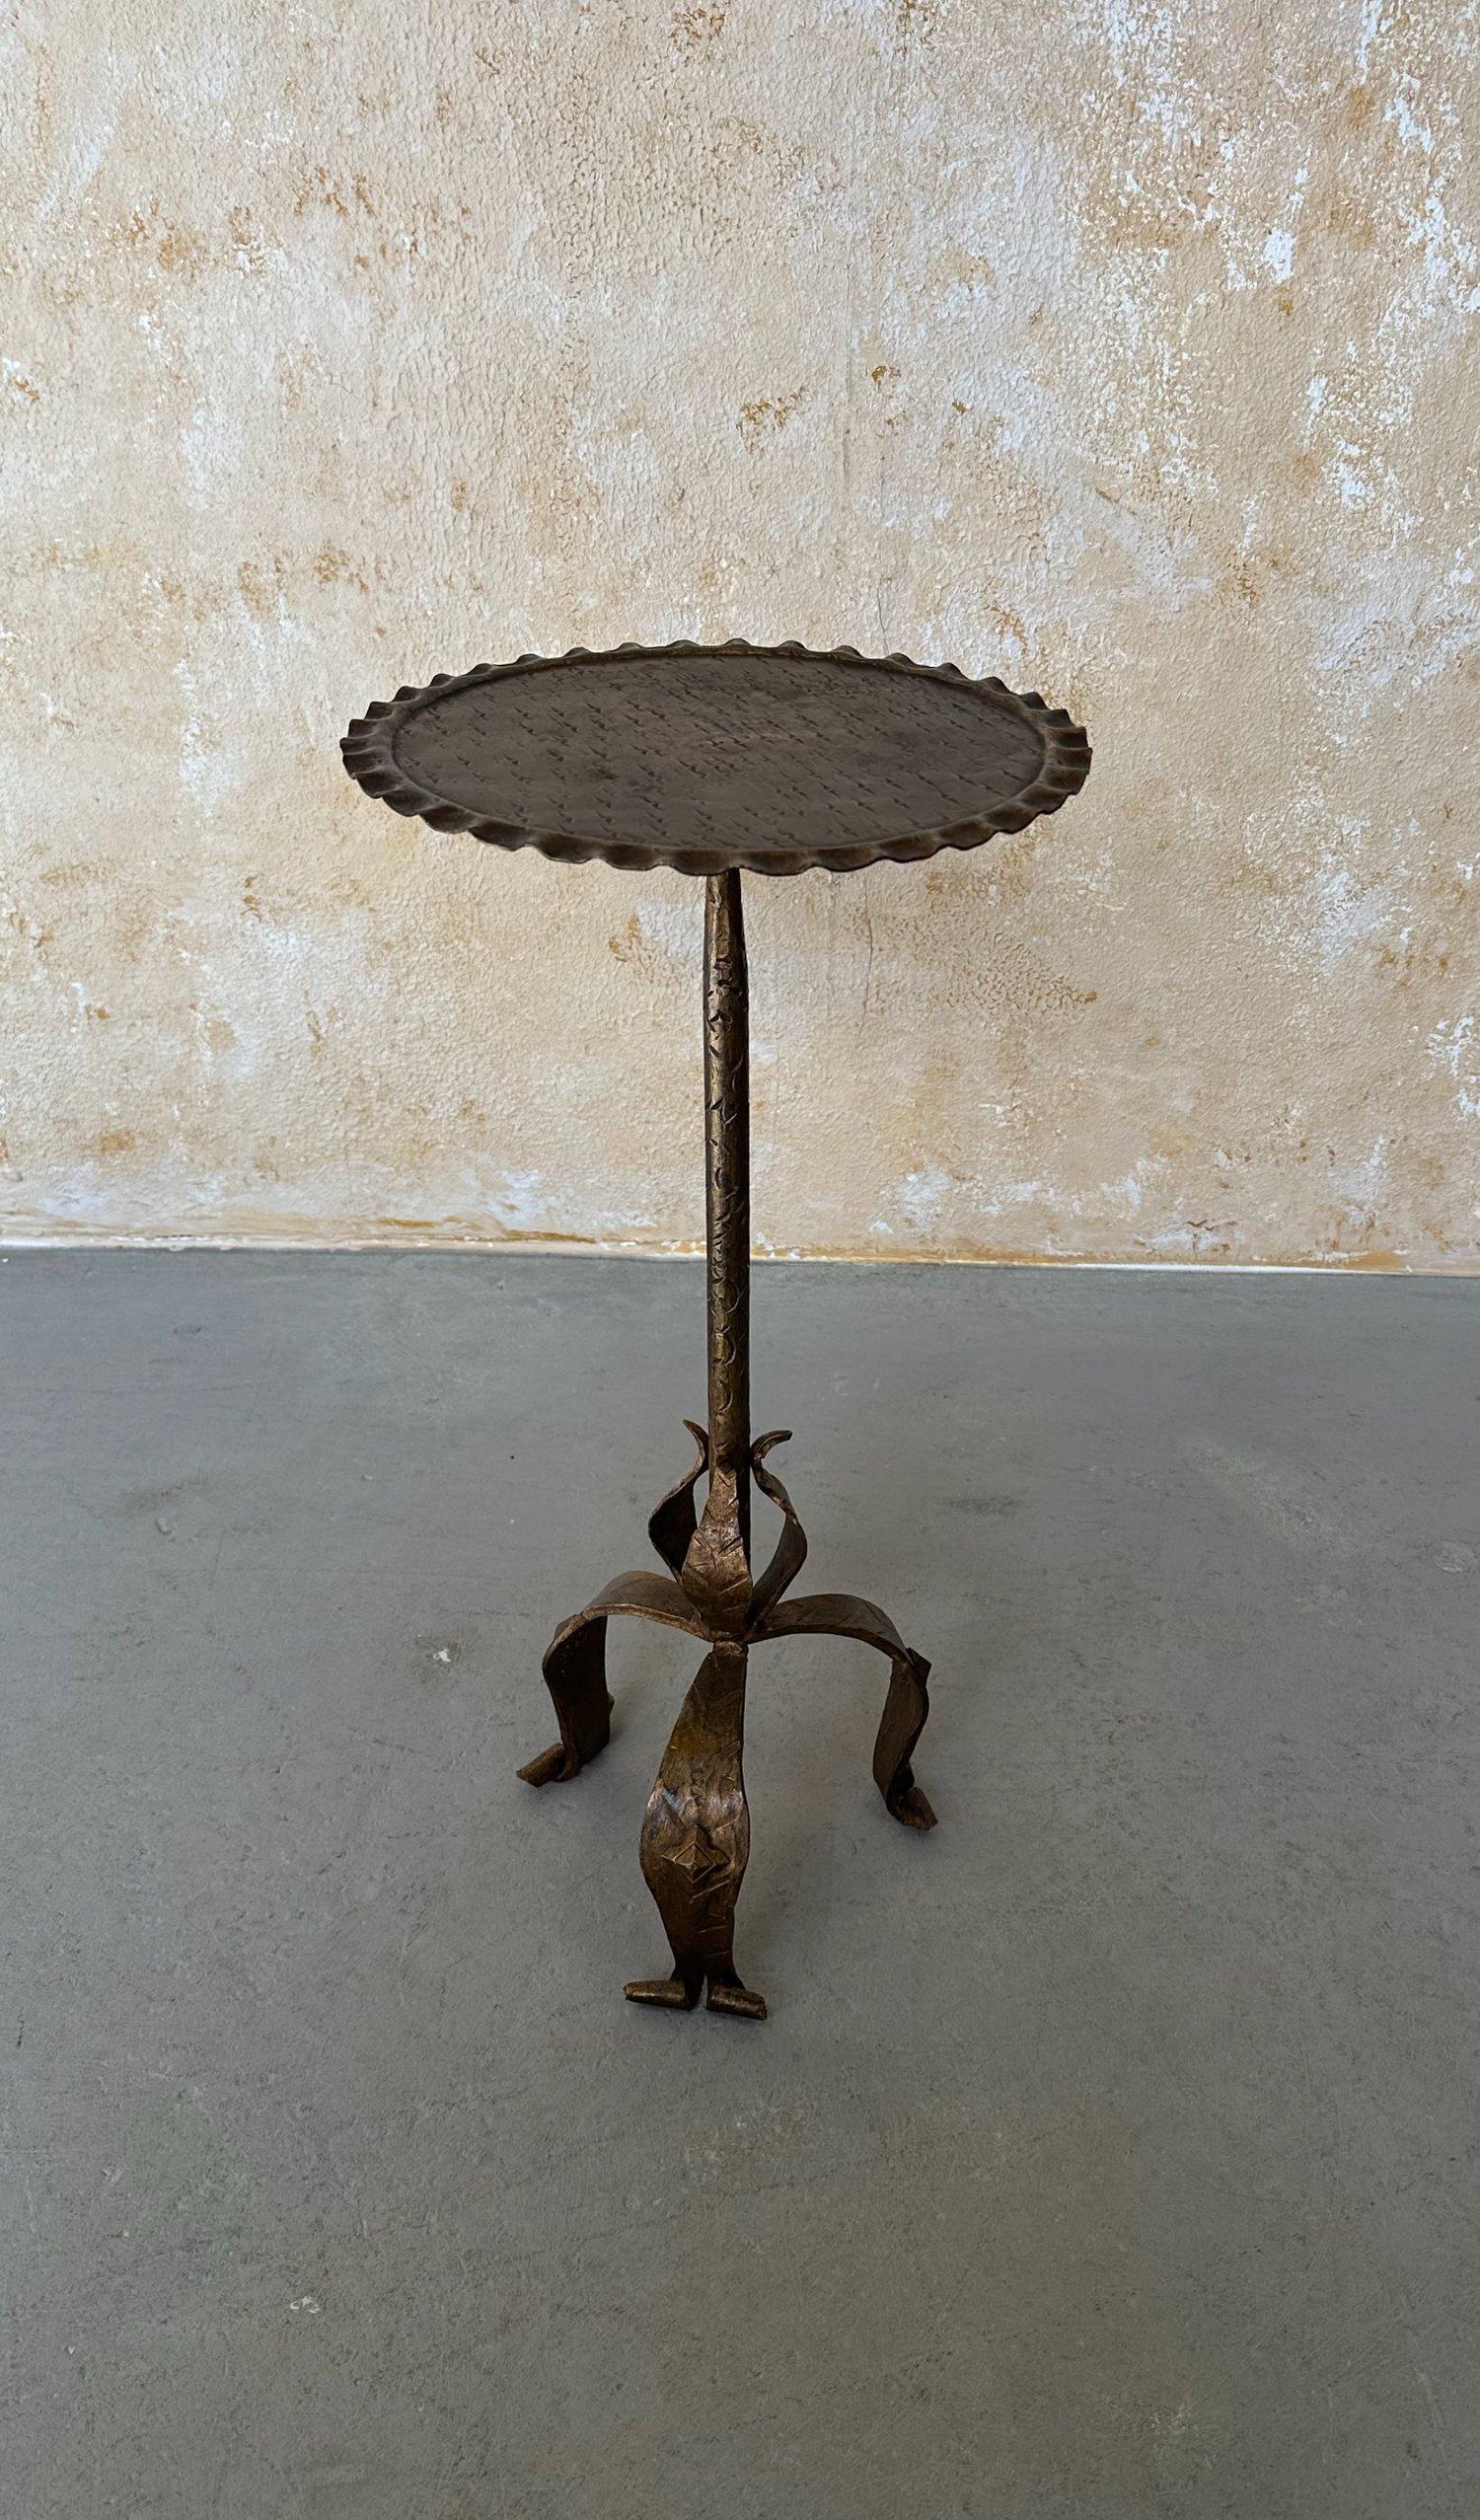 This intriguing Spanish iron and metal side table is based on a 1950s vintage design and was recently crafted by skilled artisans using traditional iron-working methods and techniques. Standing at 24 inches tall and 12 inches in diameter, the table